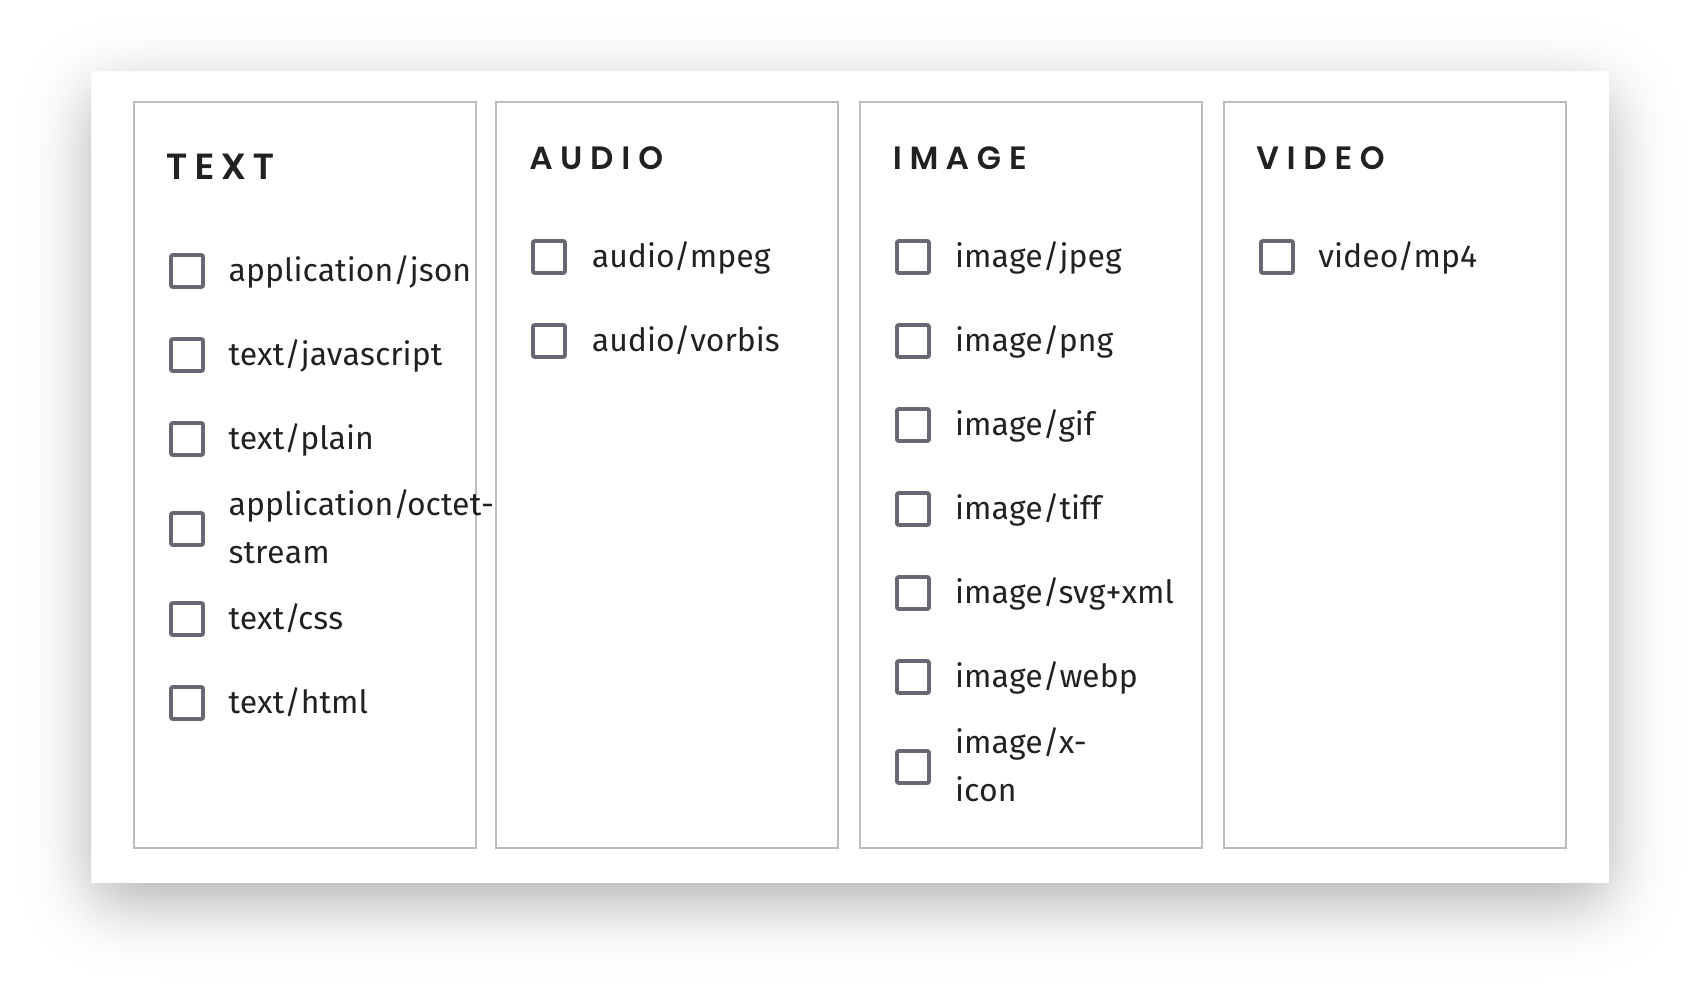 Supported media types